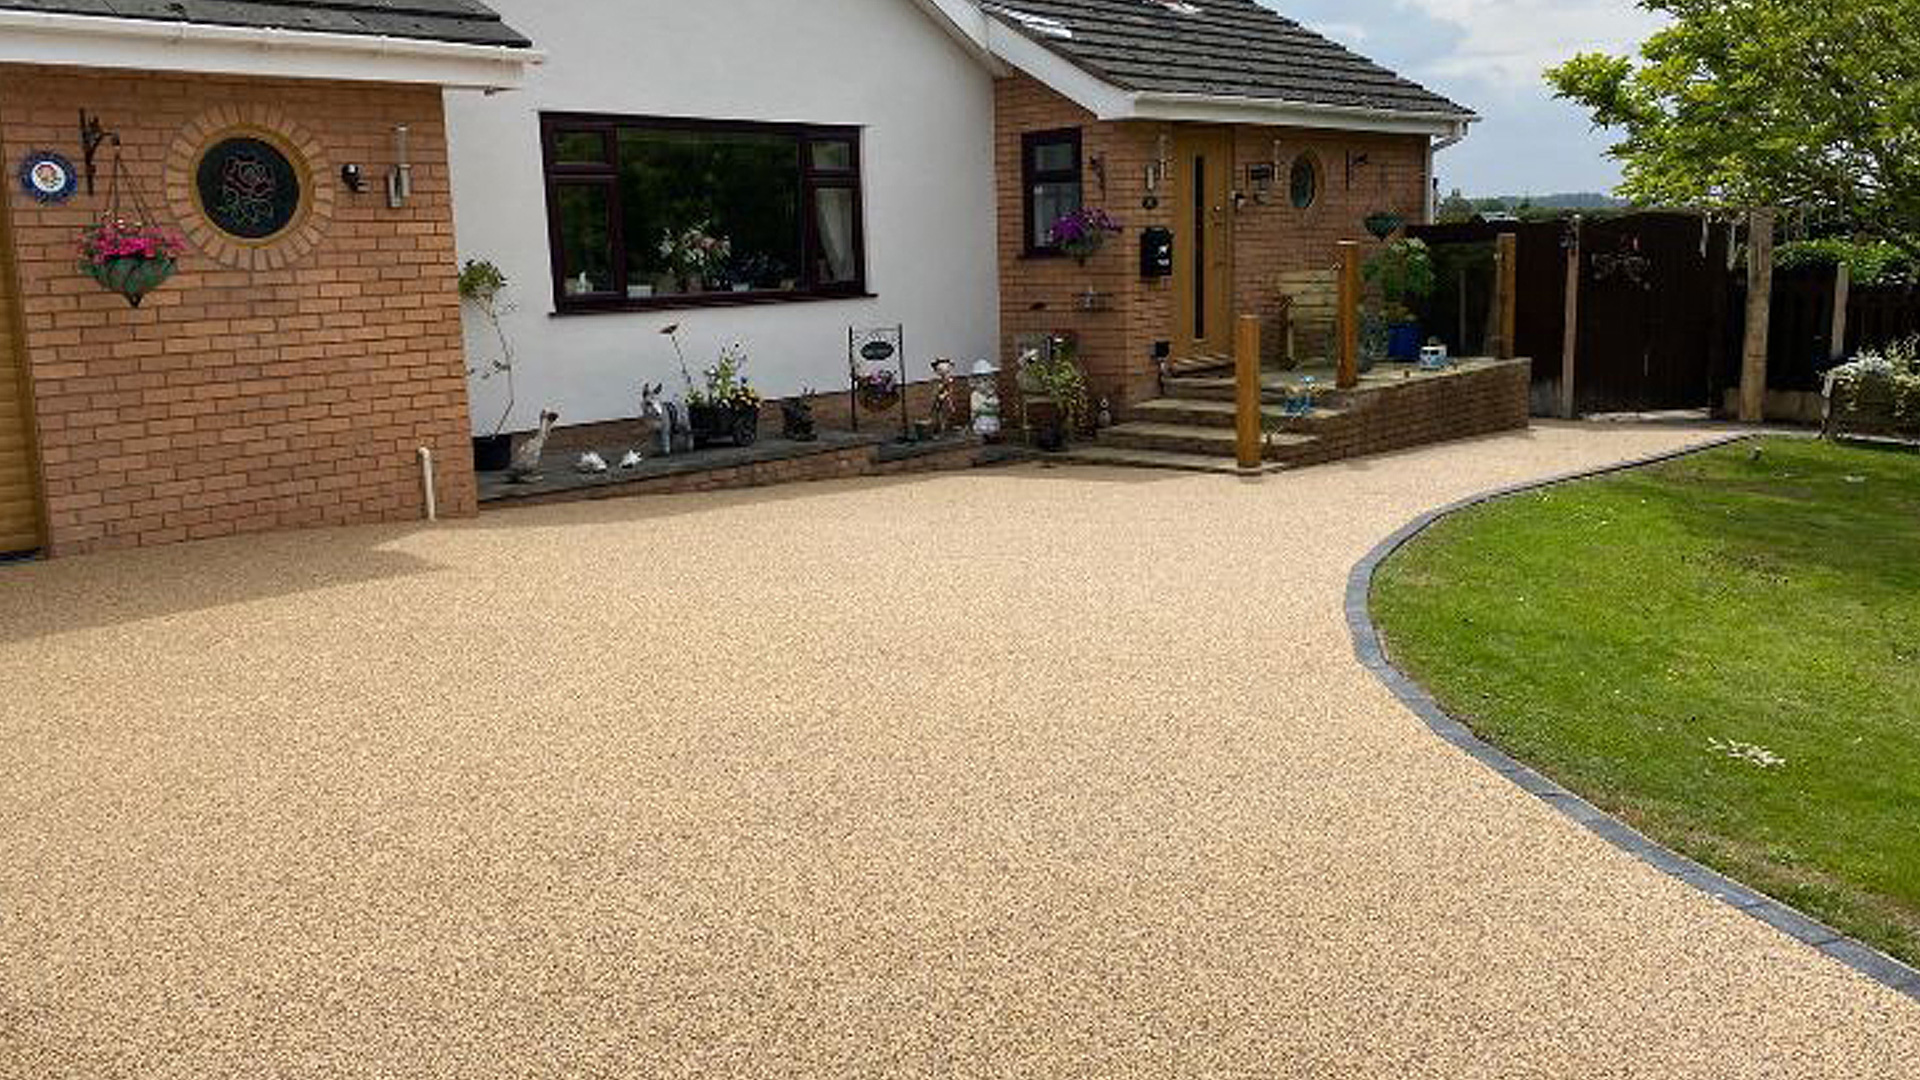 Supreme Resin Driveways DALTEX UVR resin meets required manufacturer standards. As an aliphatic resin, DALTEX UVR resin is colour stable and resistant to fade and comes with a 15 year product quality guarantee!